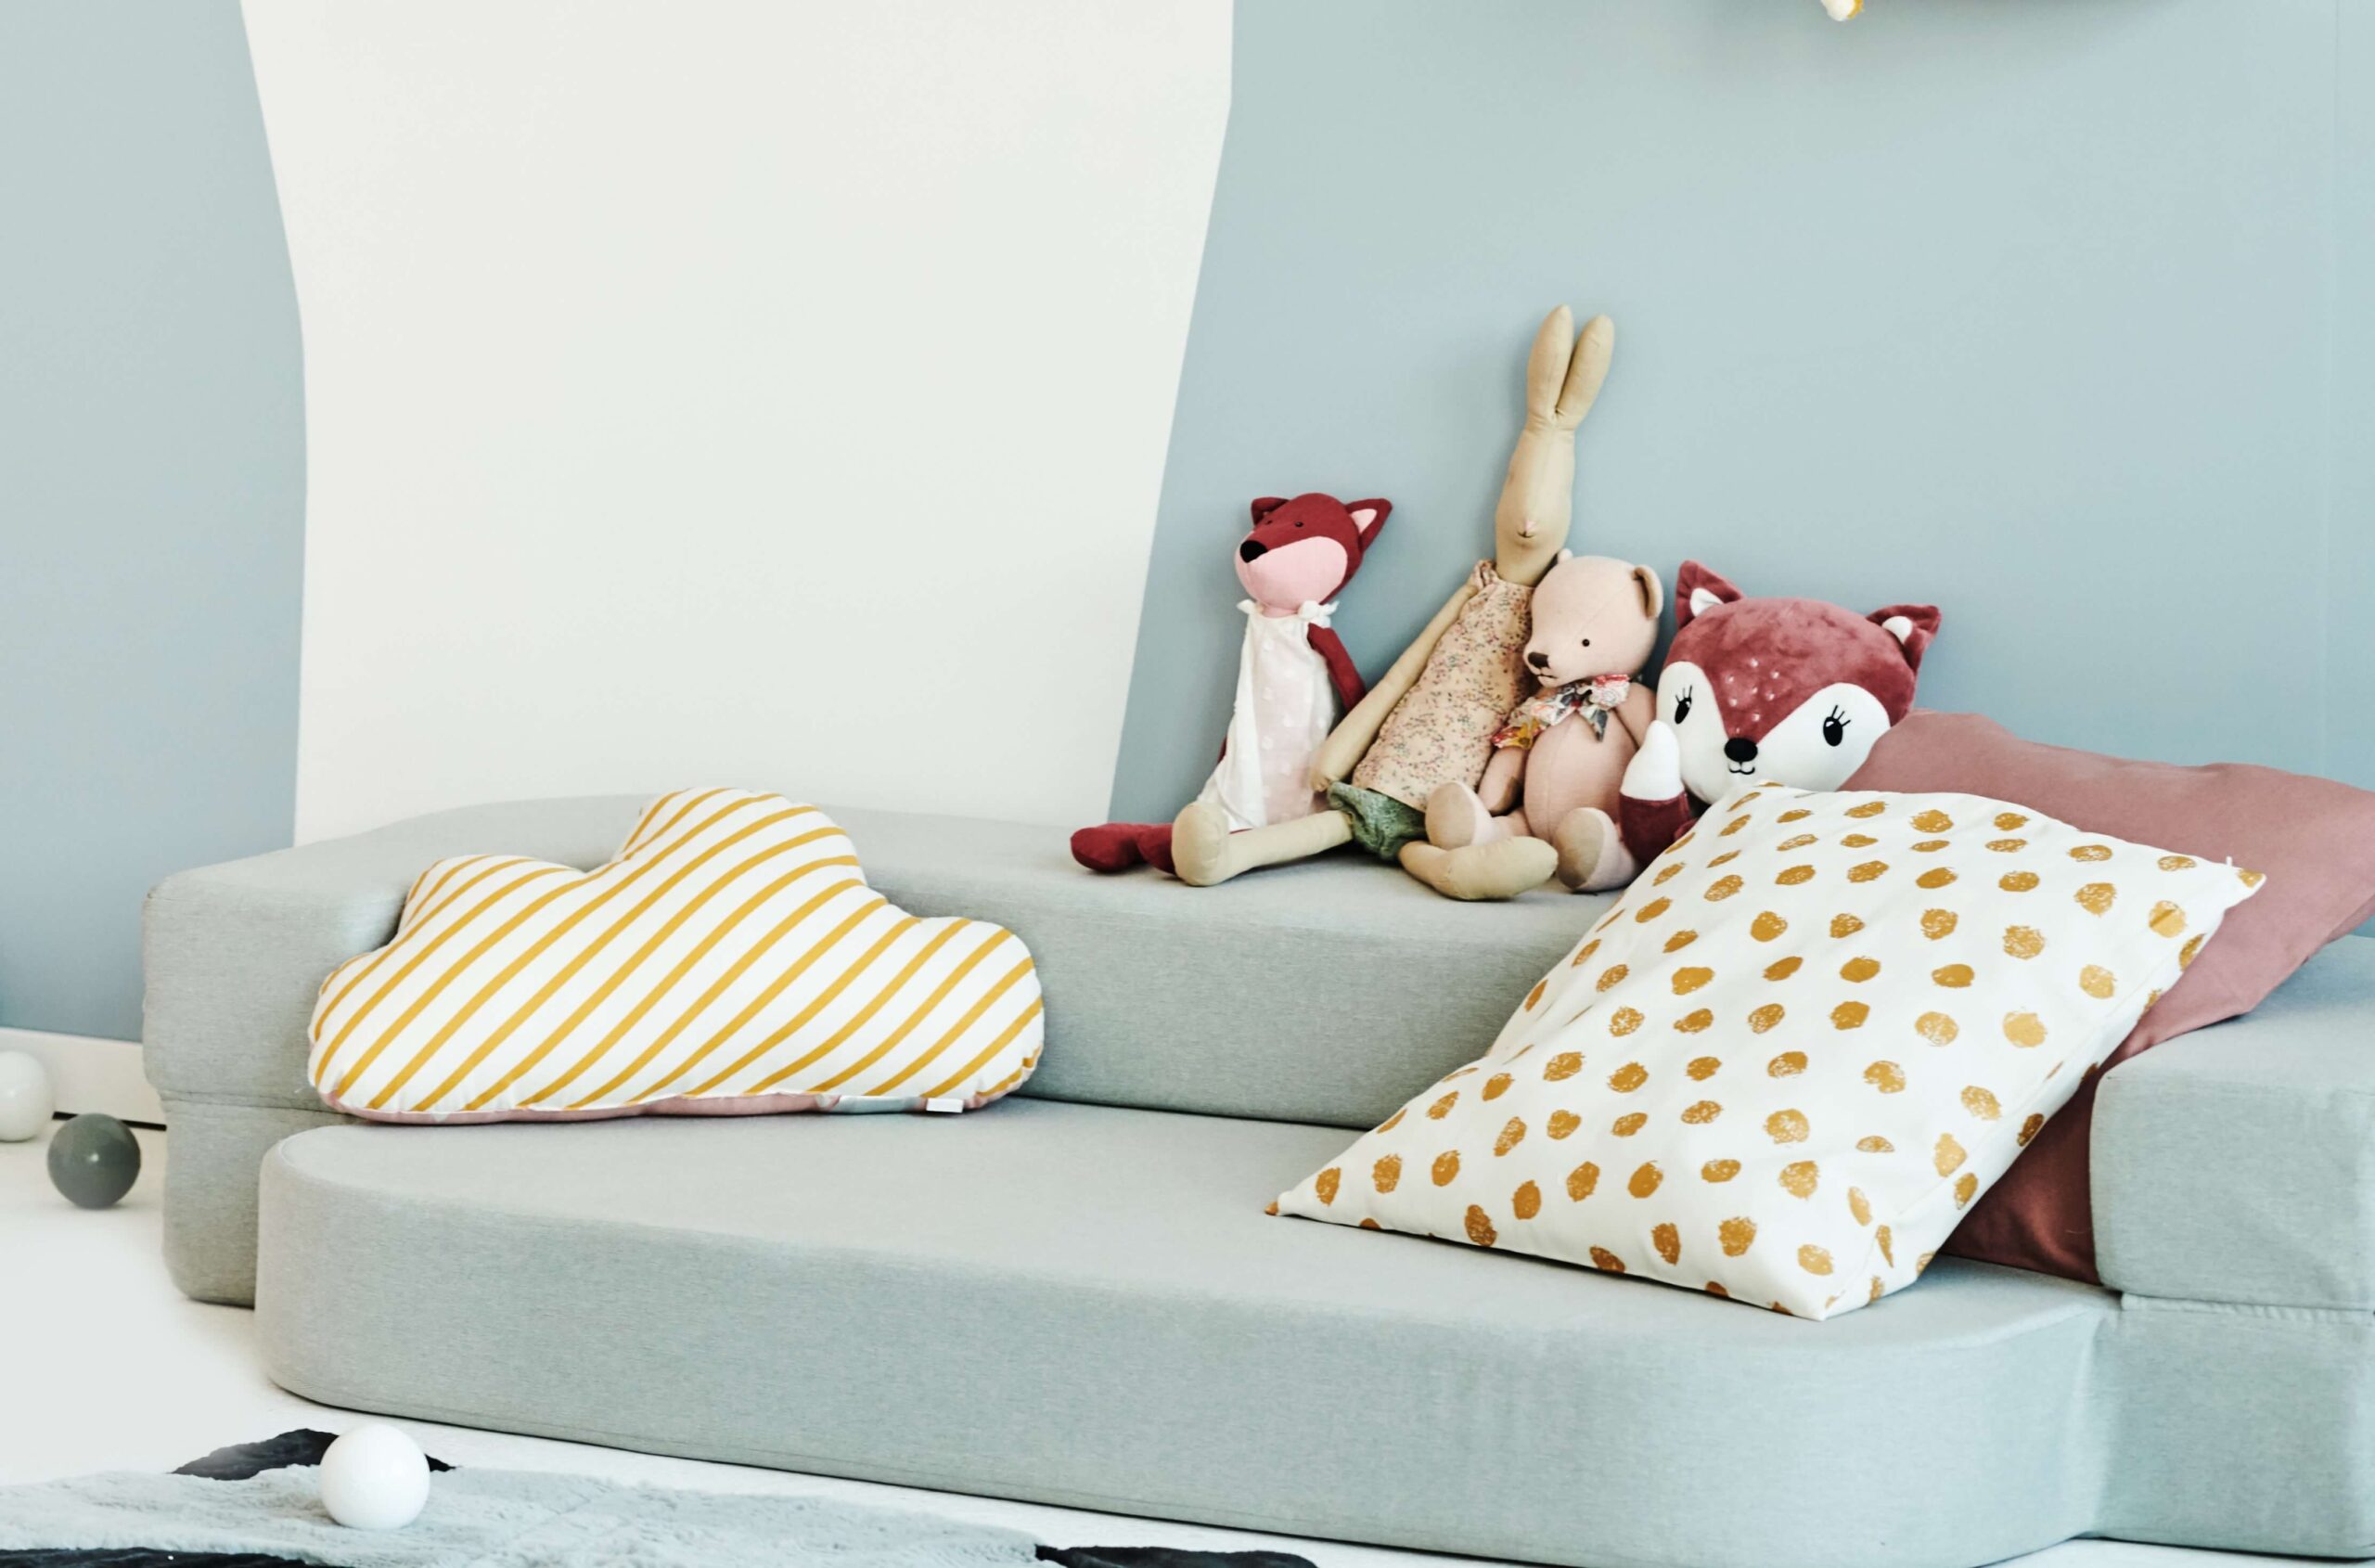 Child’s room furniture – what to choose?